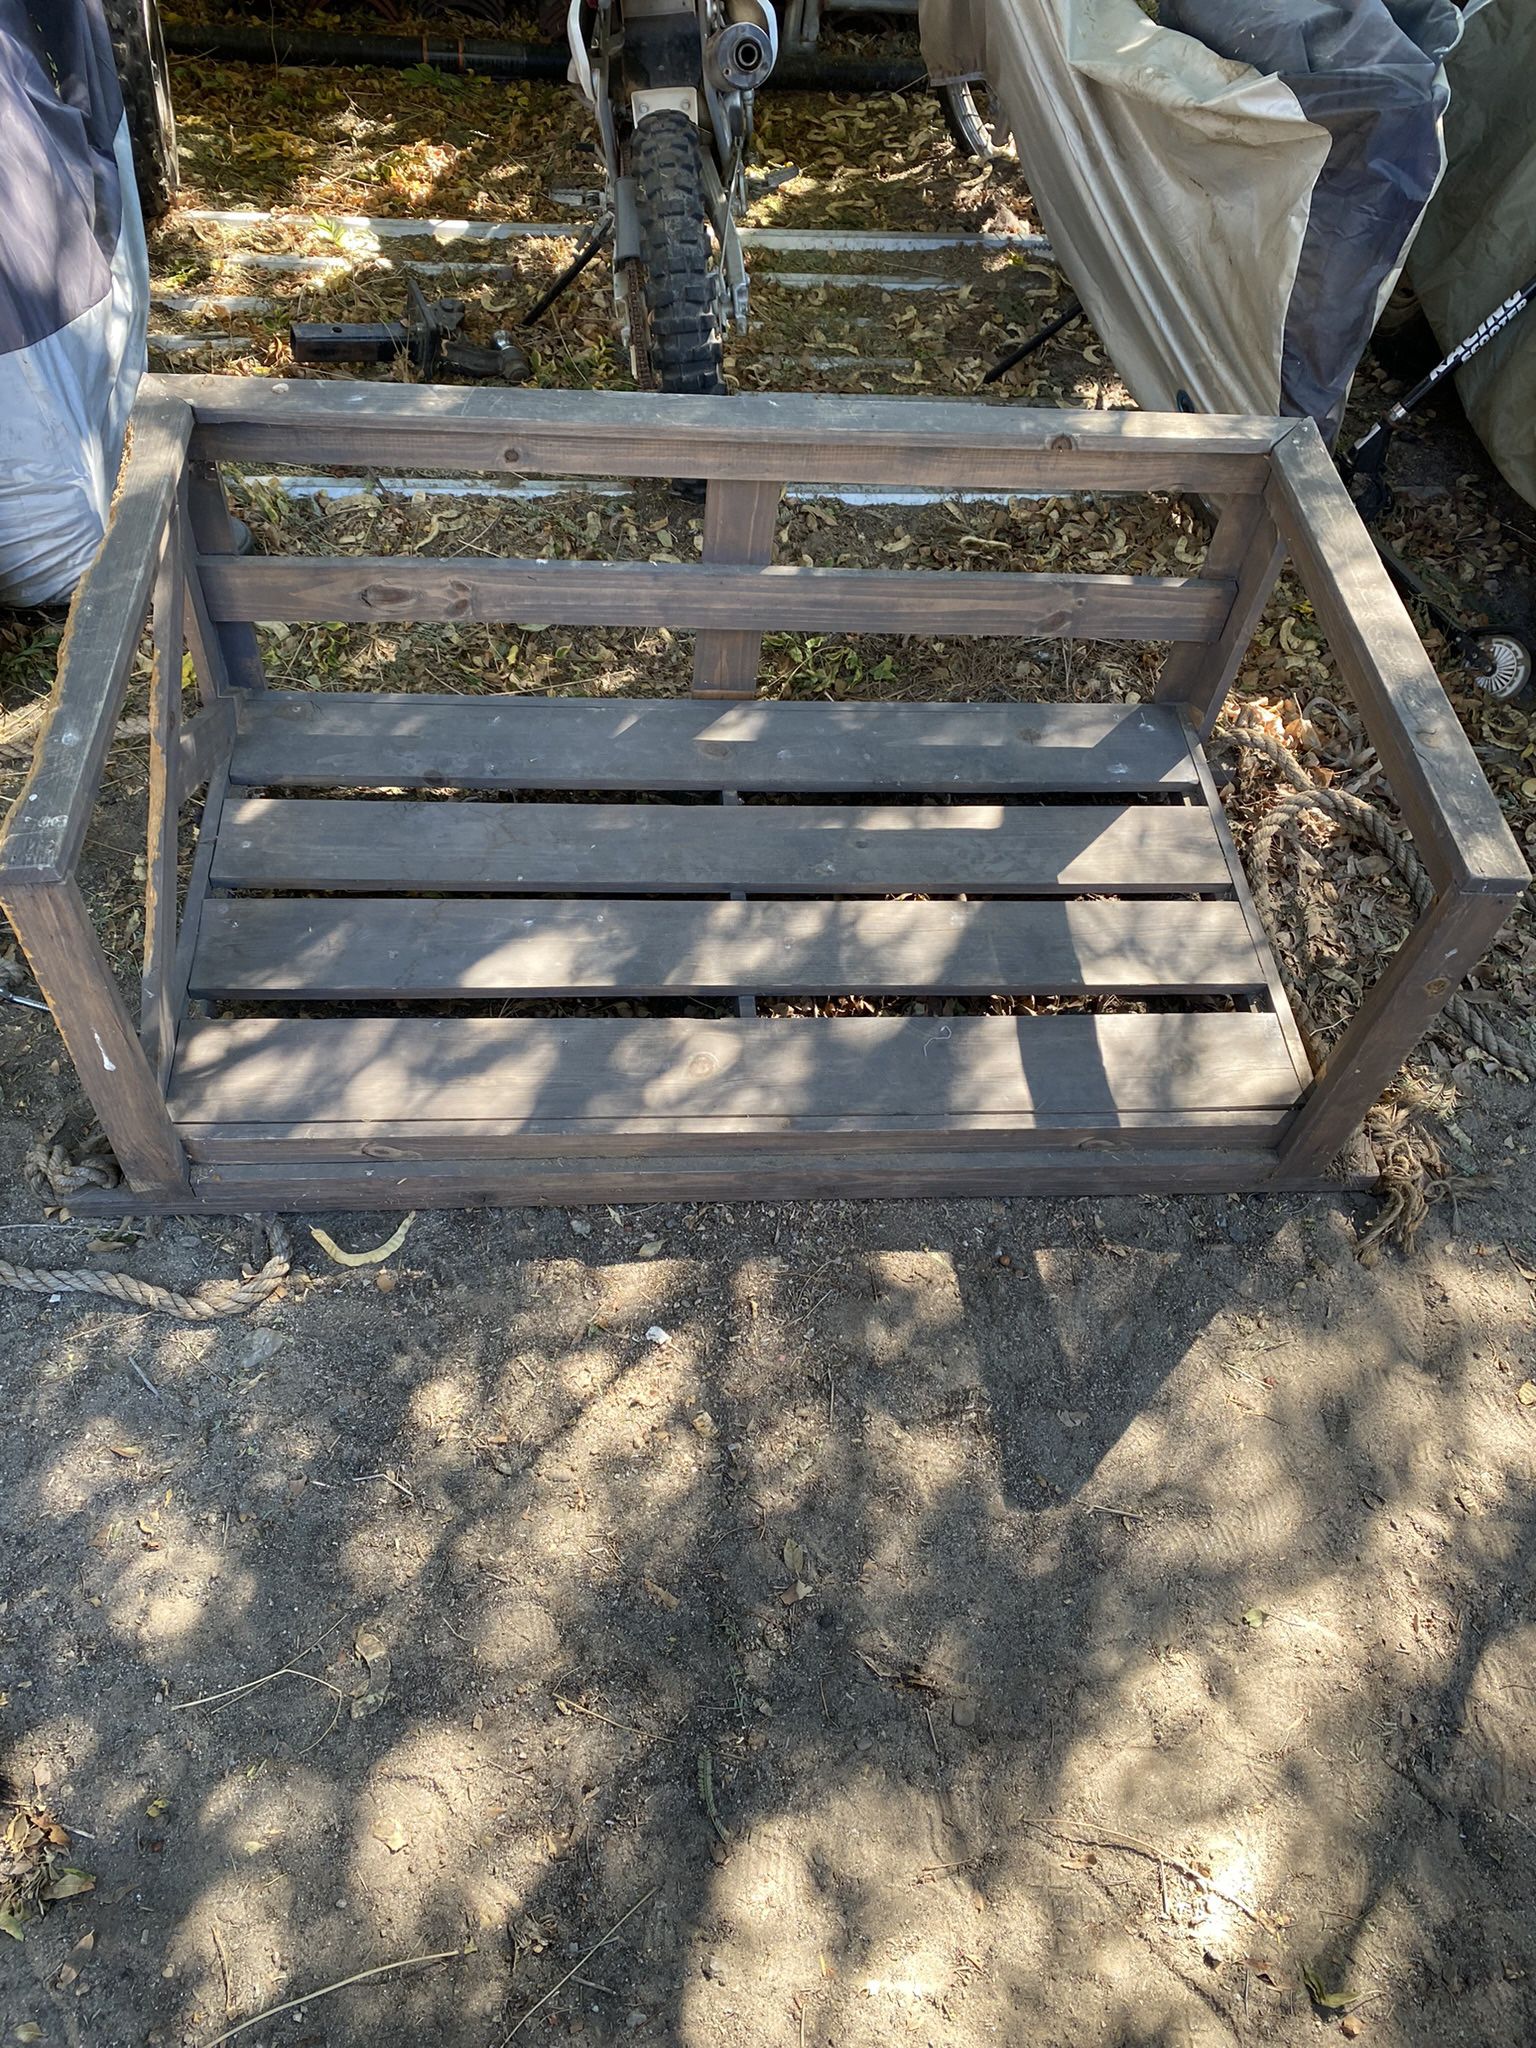 Porch Outdoor Wood Swing In Good Condition About 60” Wide  